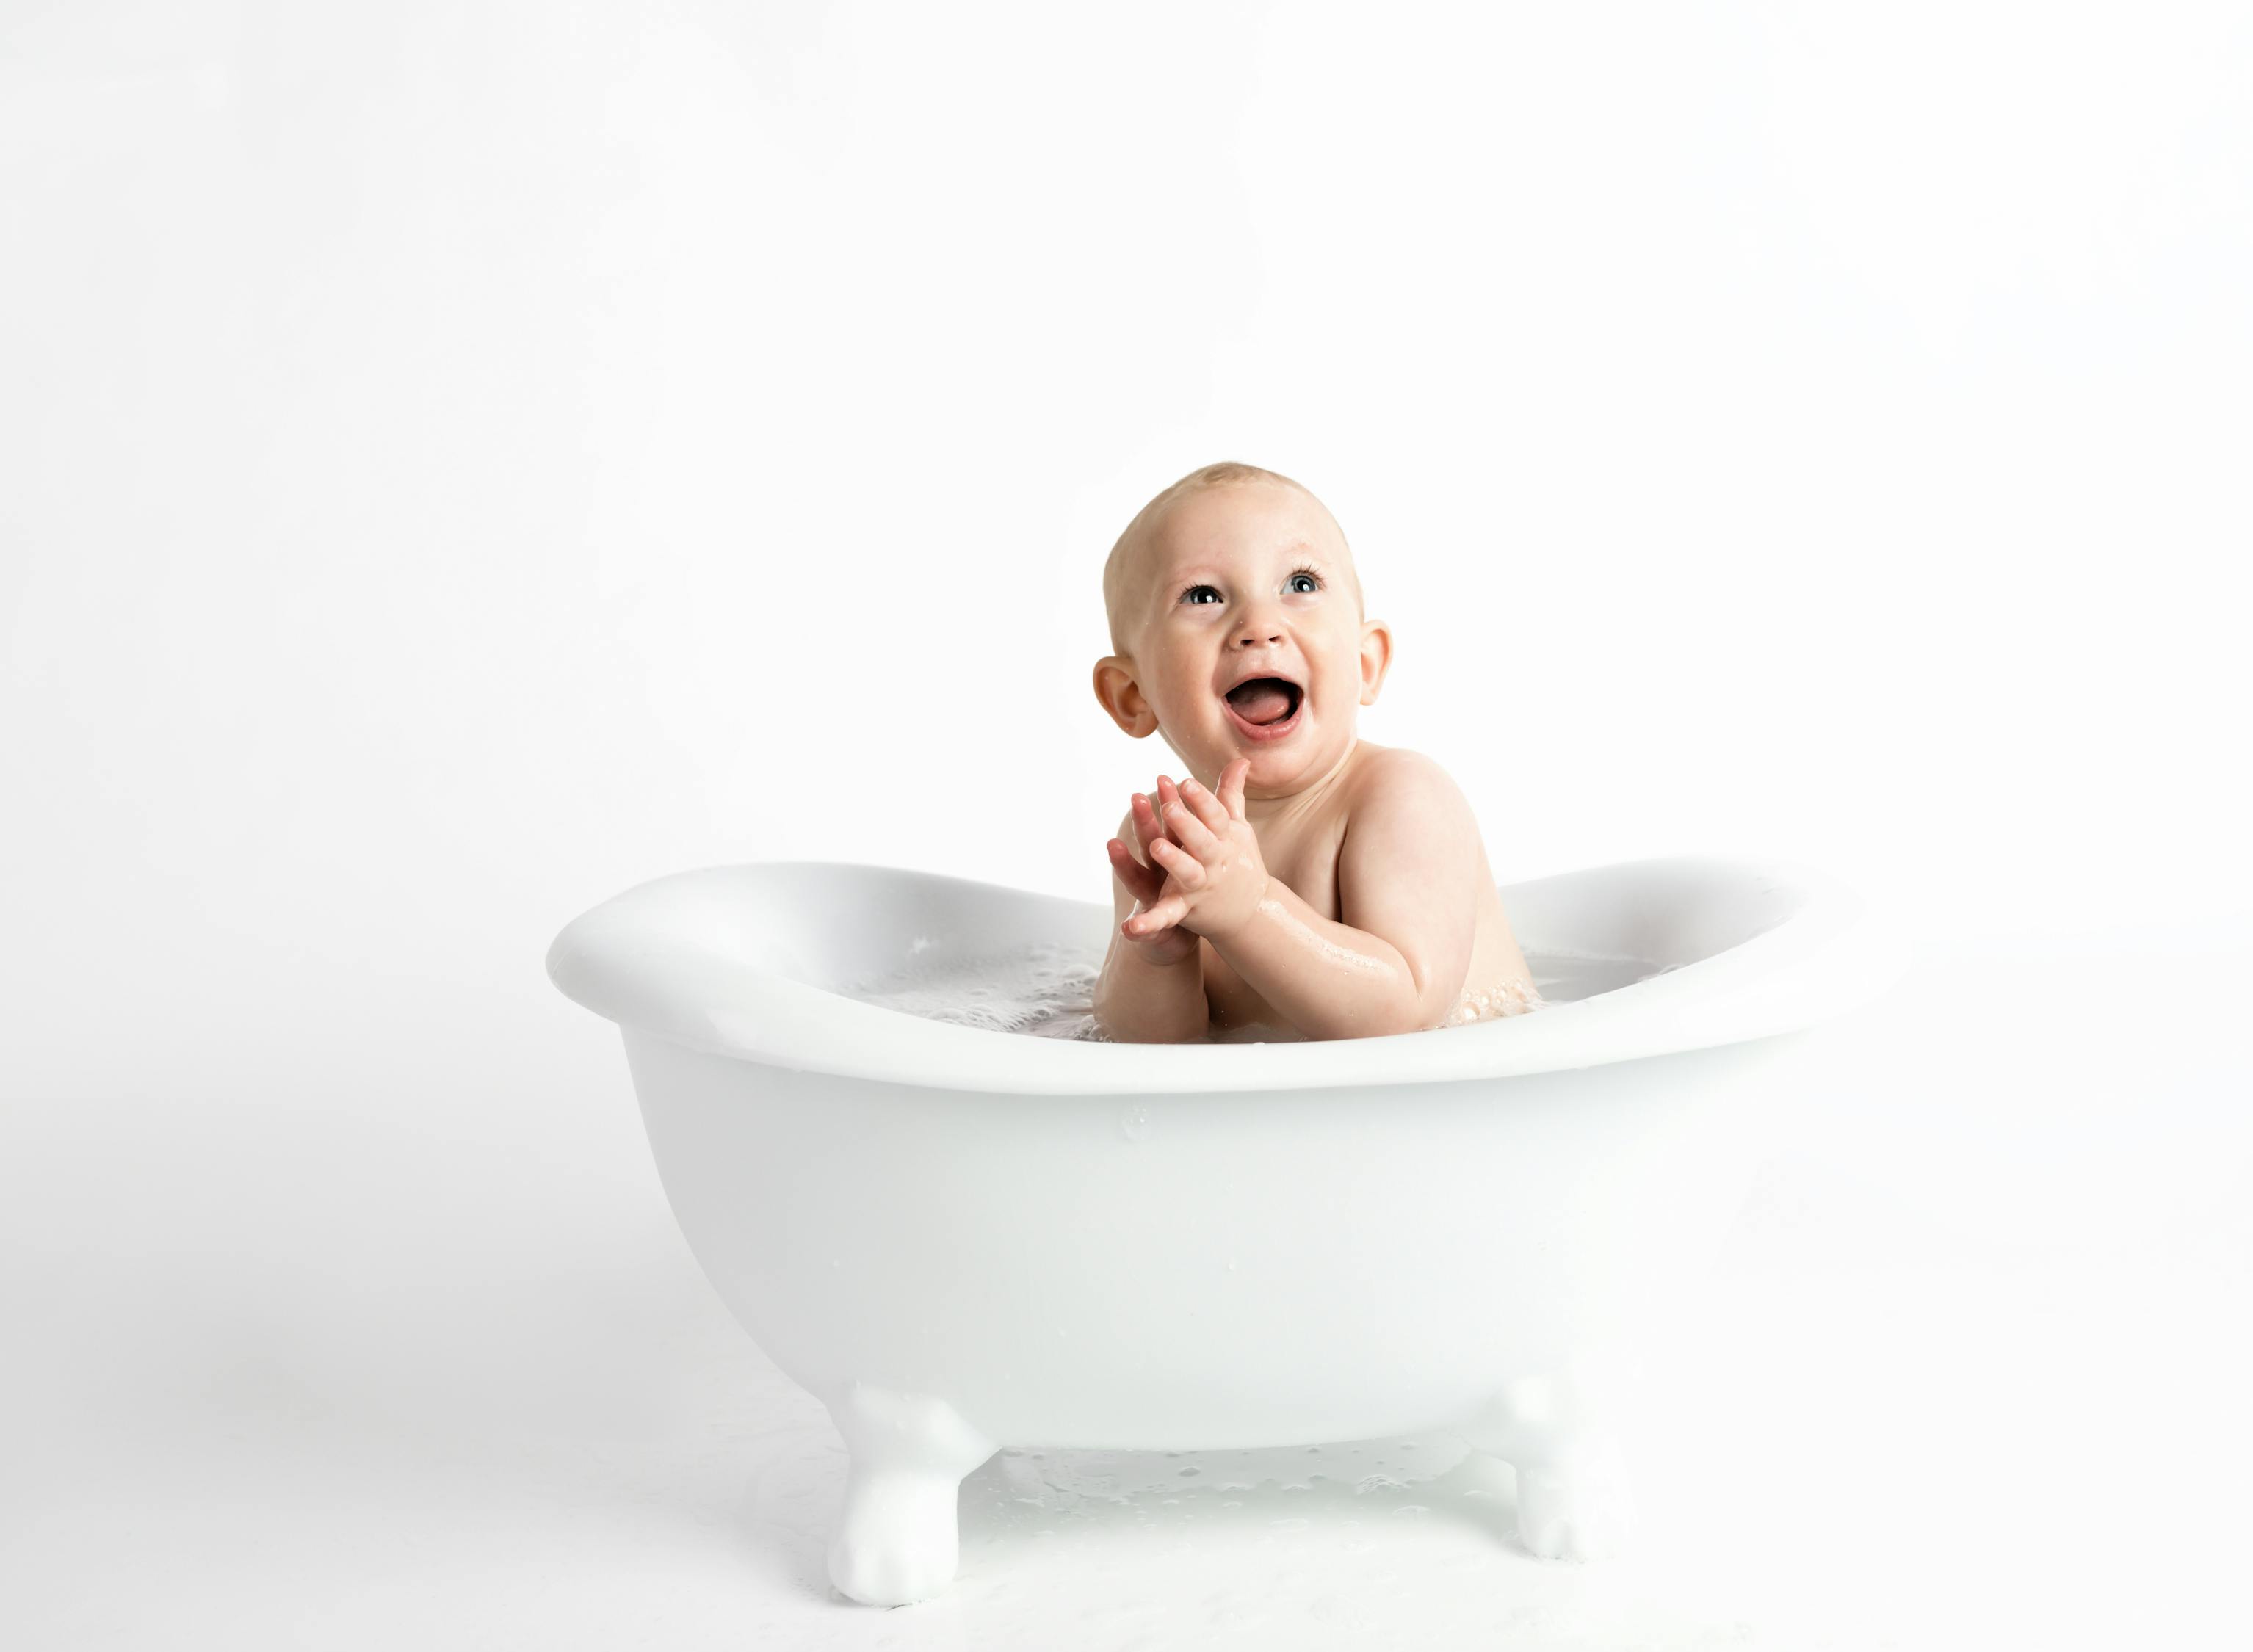 Baby Inside White Bathtub With Water